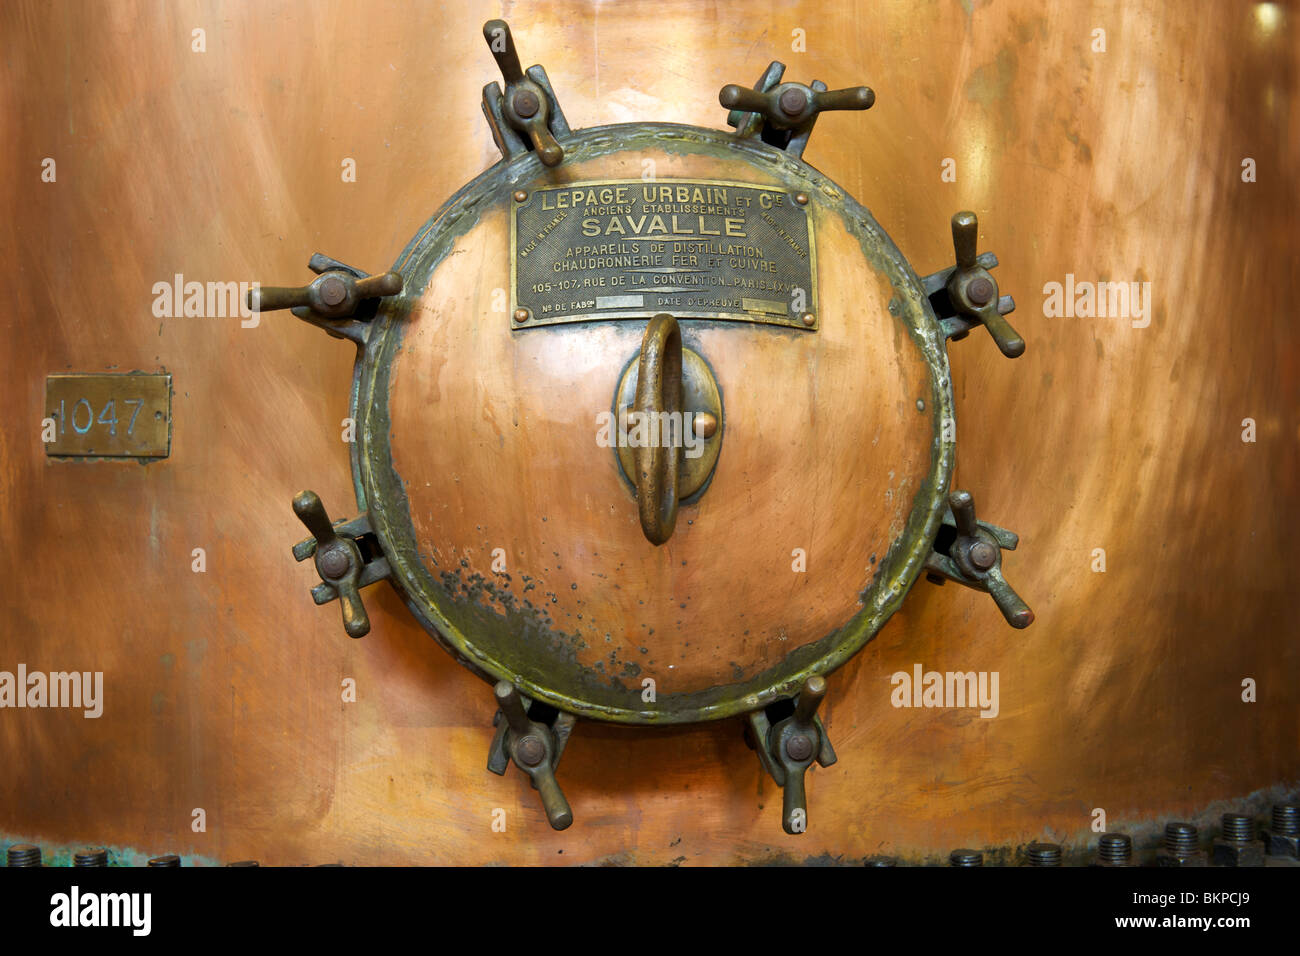 Close-up of the plaque of manufacture on a copper still in the Van Ryn distillery in Stellenbosch, South Africa. Stock Photo